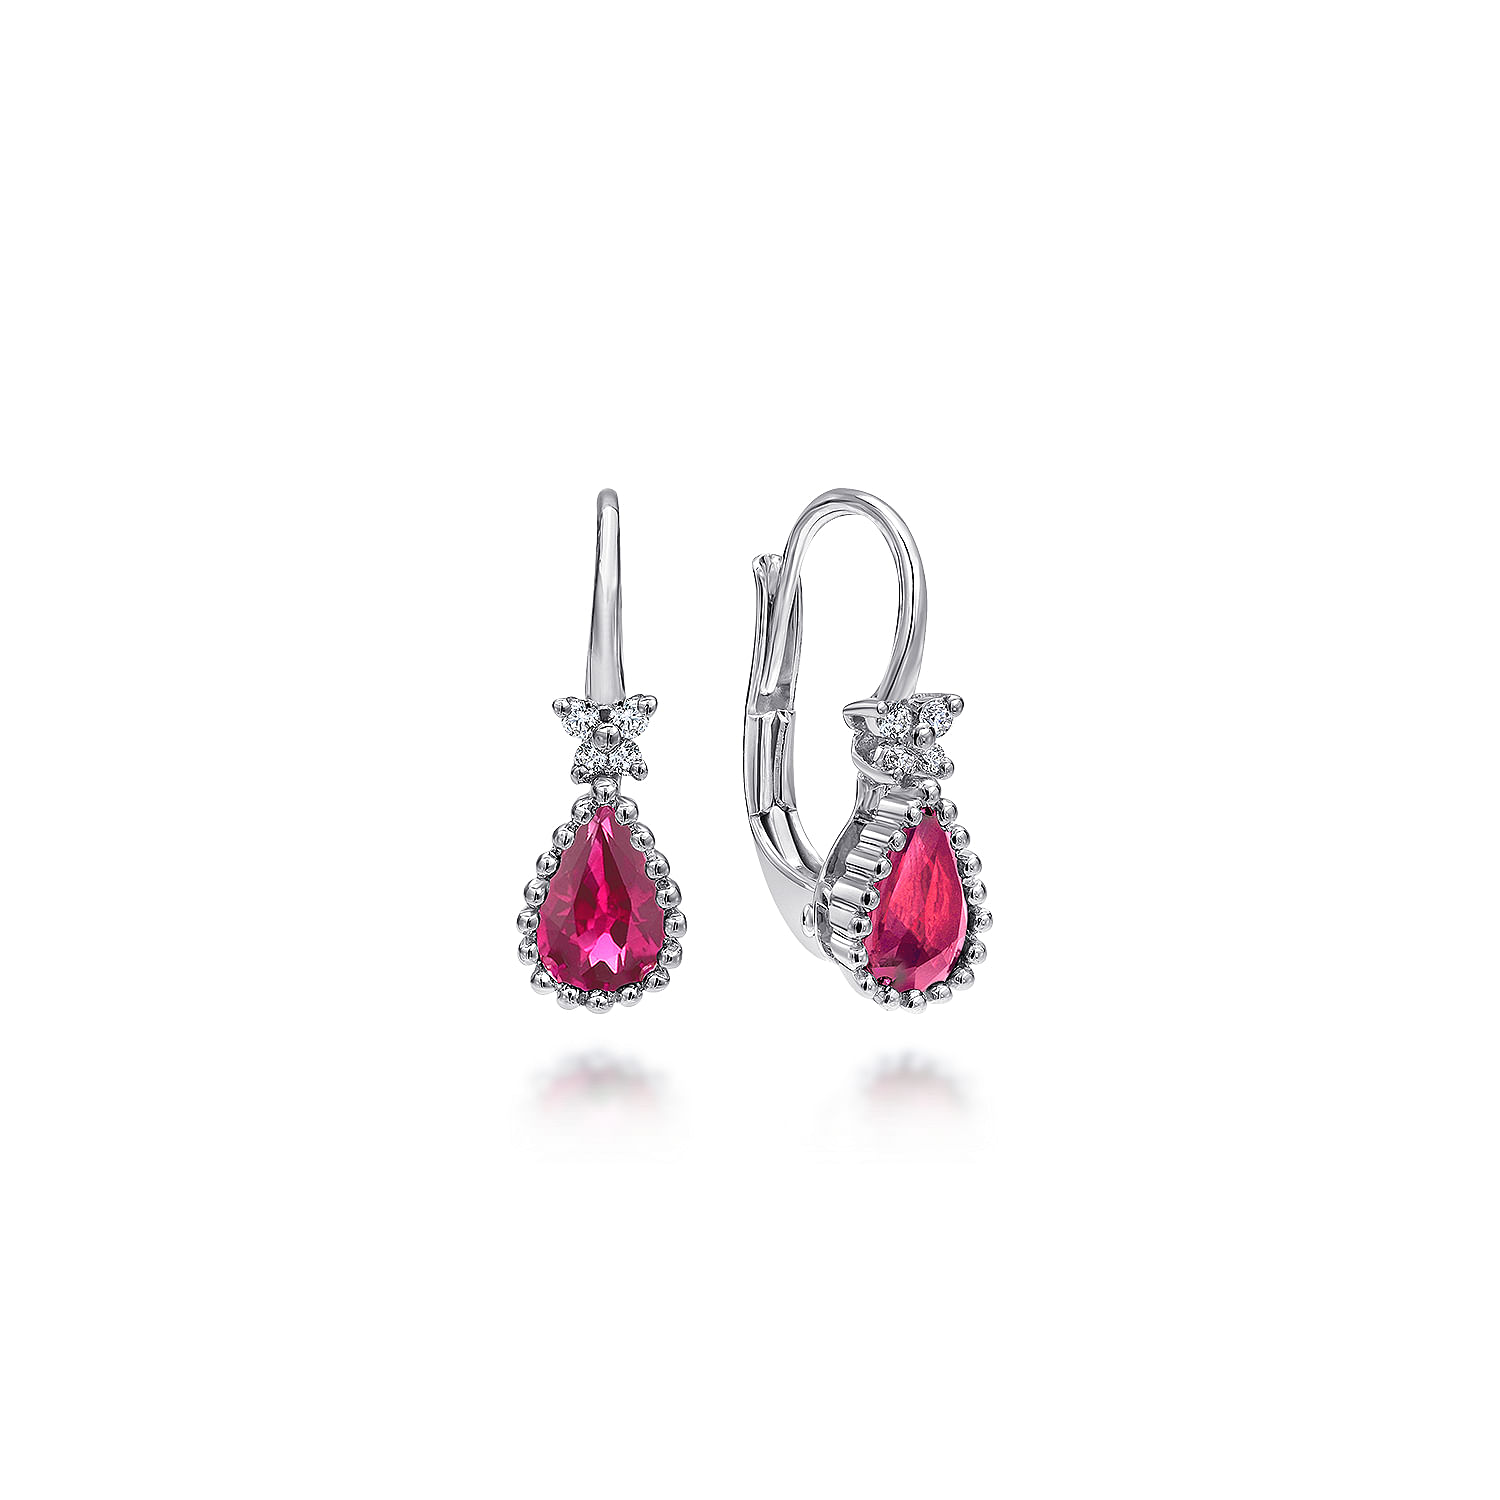 14K White Gold Beaded Pear Shaped Ruby and Diamond Drop Earrings